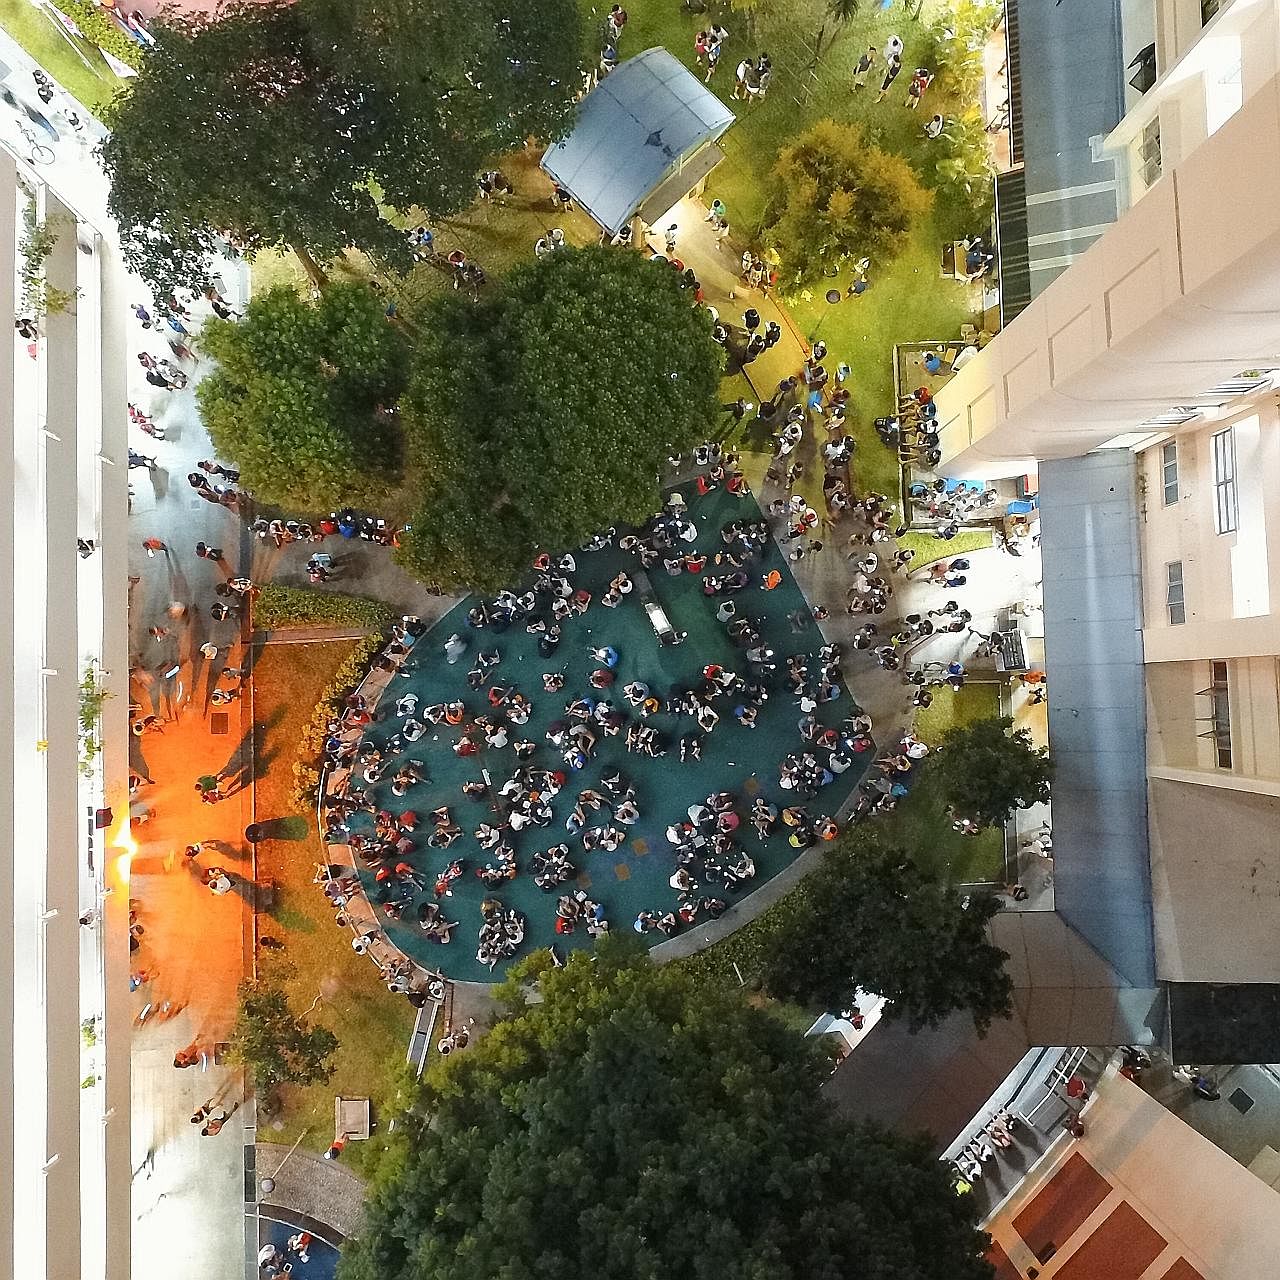 Pokemania was alive in Hougang Avenue 10 on Tuesday night, where dozens of fans gathered at a common area at Block 401. The playground had a "lure", which increases the sightings of Pokemon, and some lucky players were rewarded with the rare Pokemon 